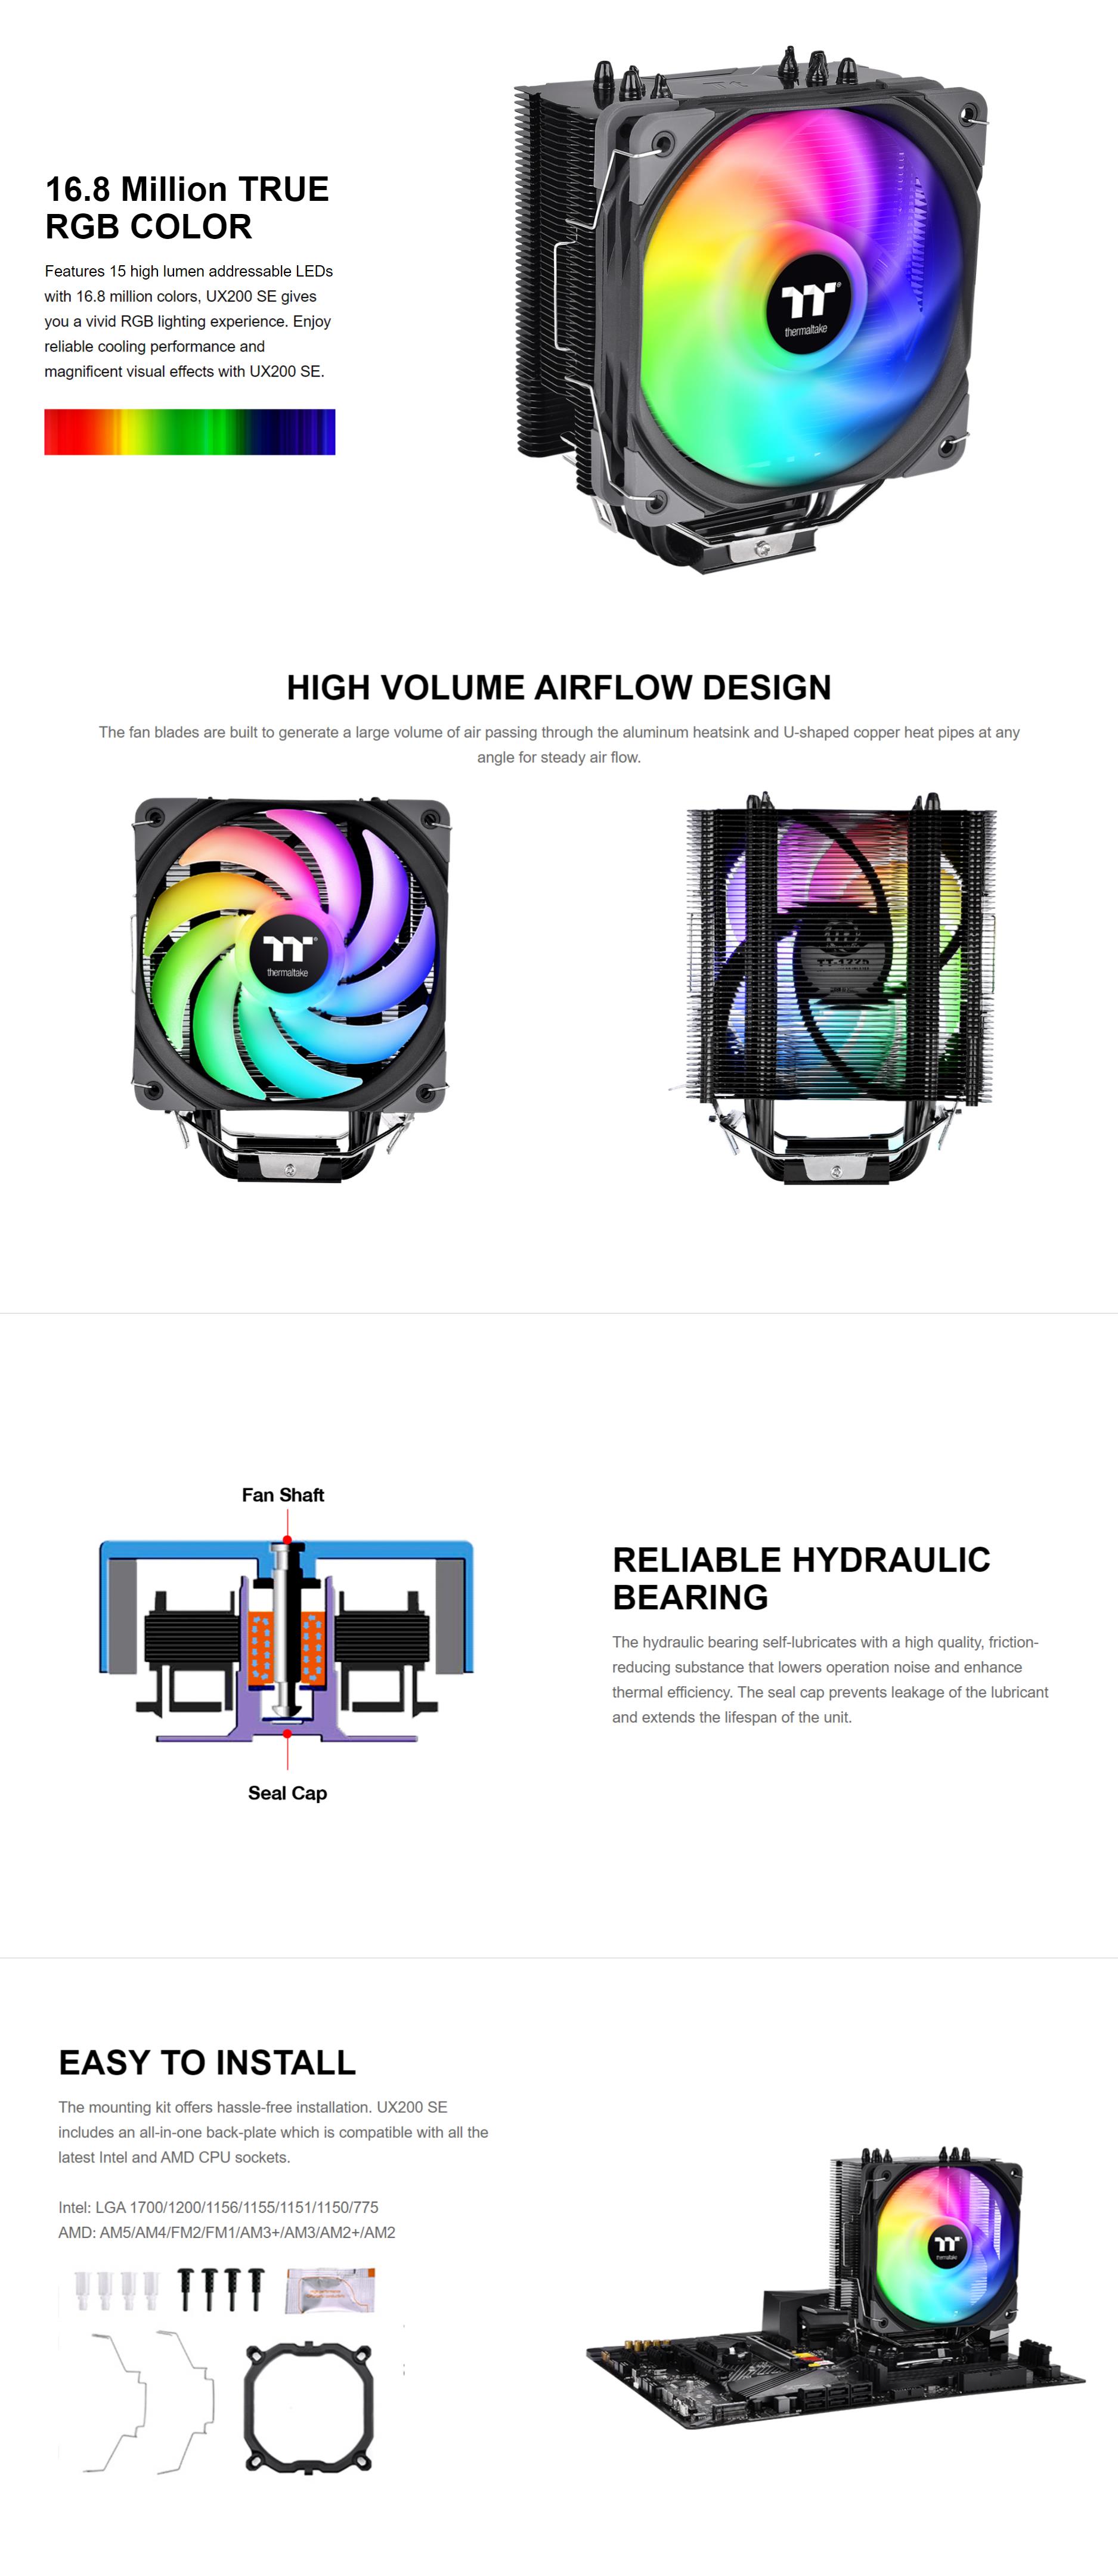 A large marketing image providing additional information about the product Thermaltake UX200 SE - ARGB CPU Cooler - Additional alt info not provided